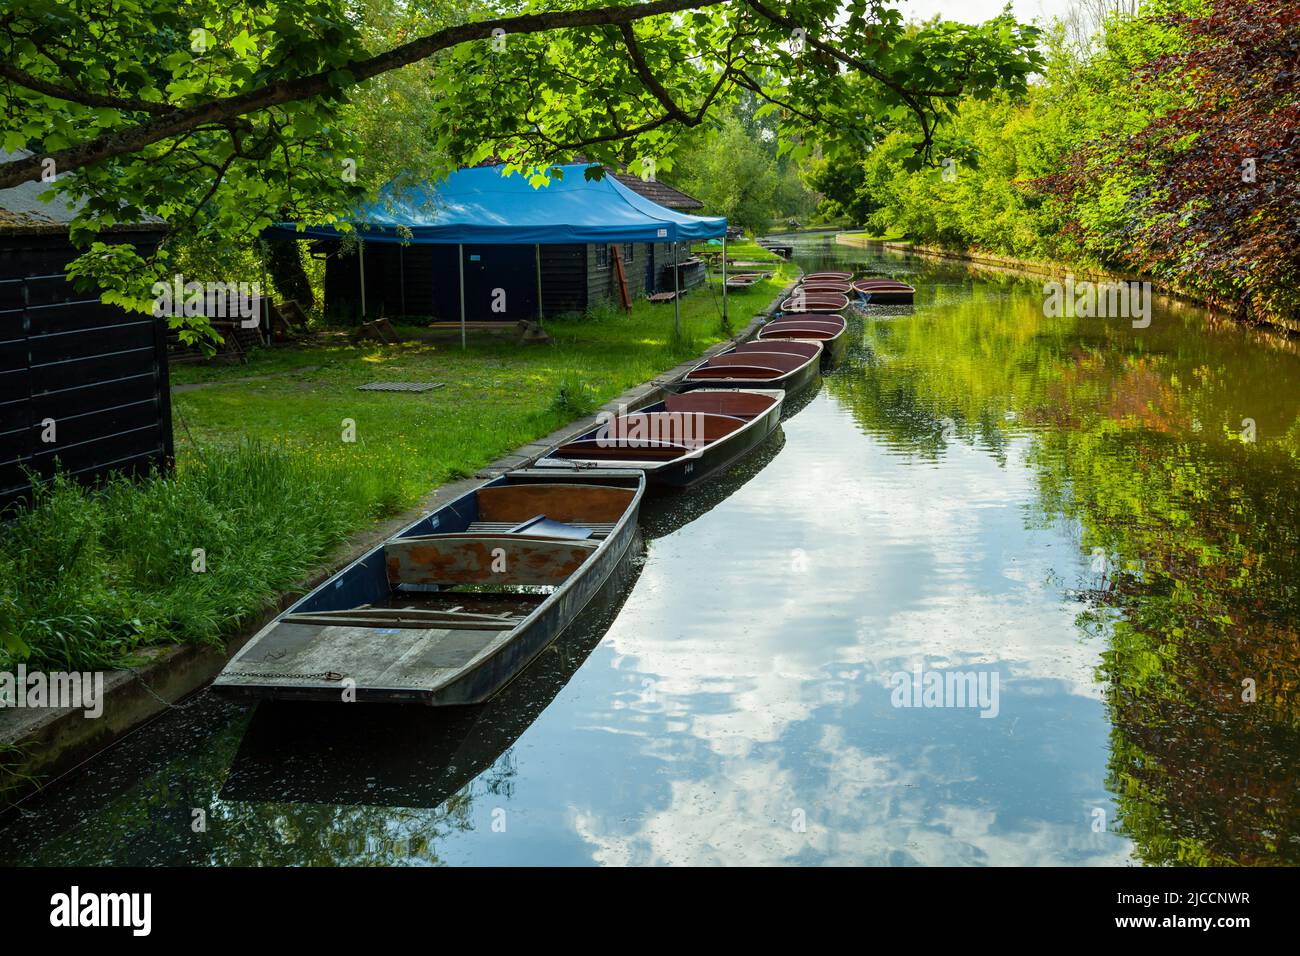 Punter boats on river Cam in Cambridge, England. Stock Photo